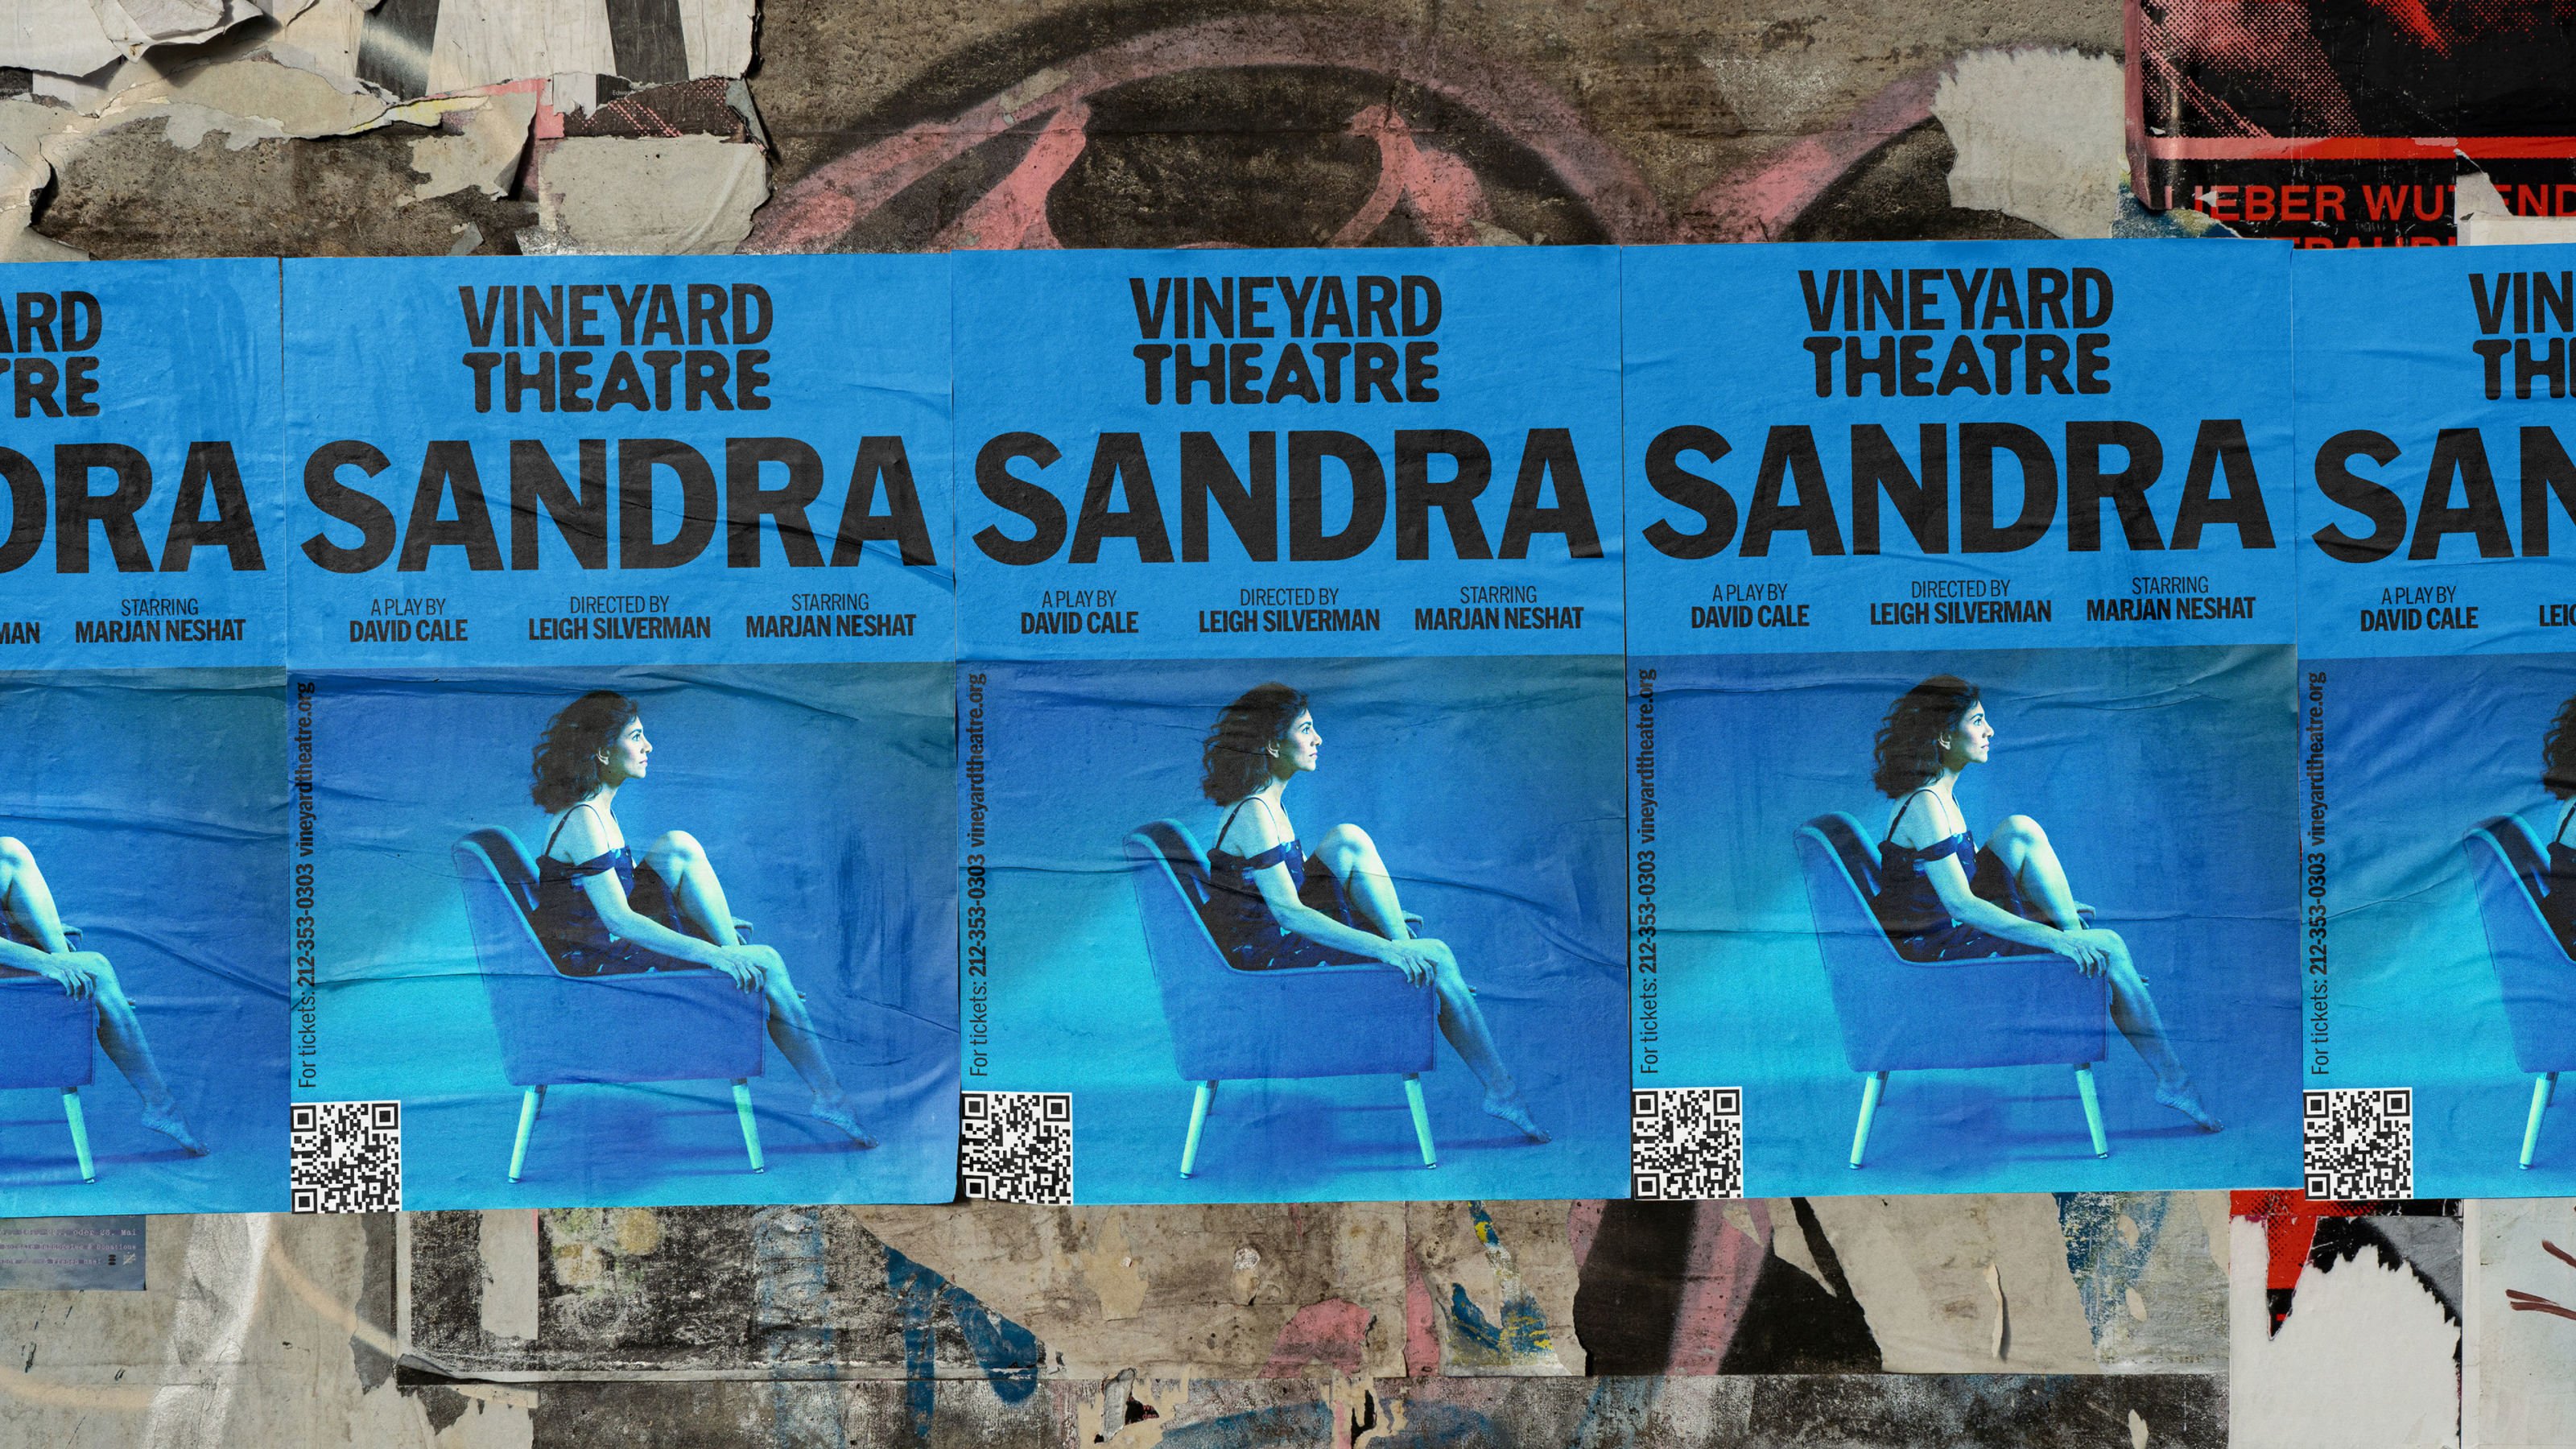 Brand identity and poster design by London-based NB Studio for New York City's Vineyard Theatre